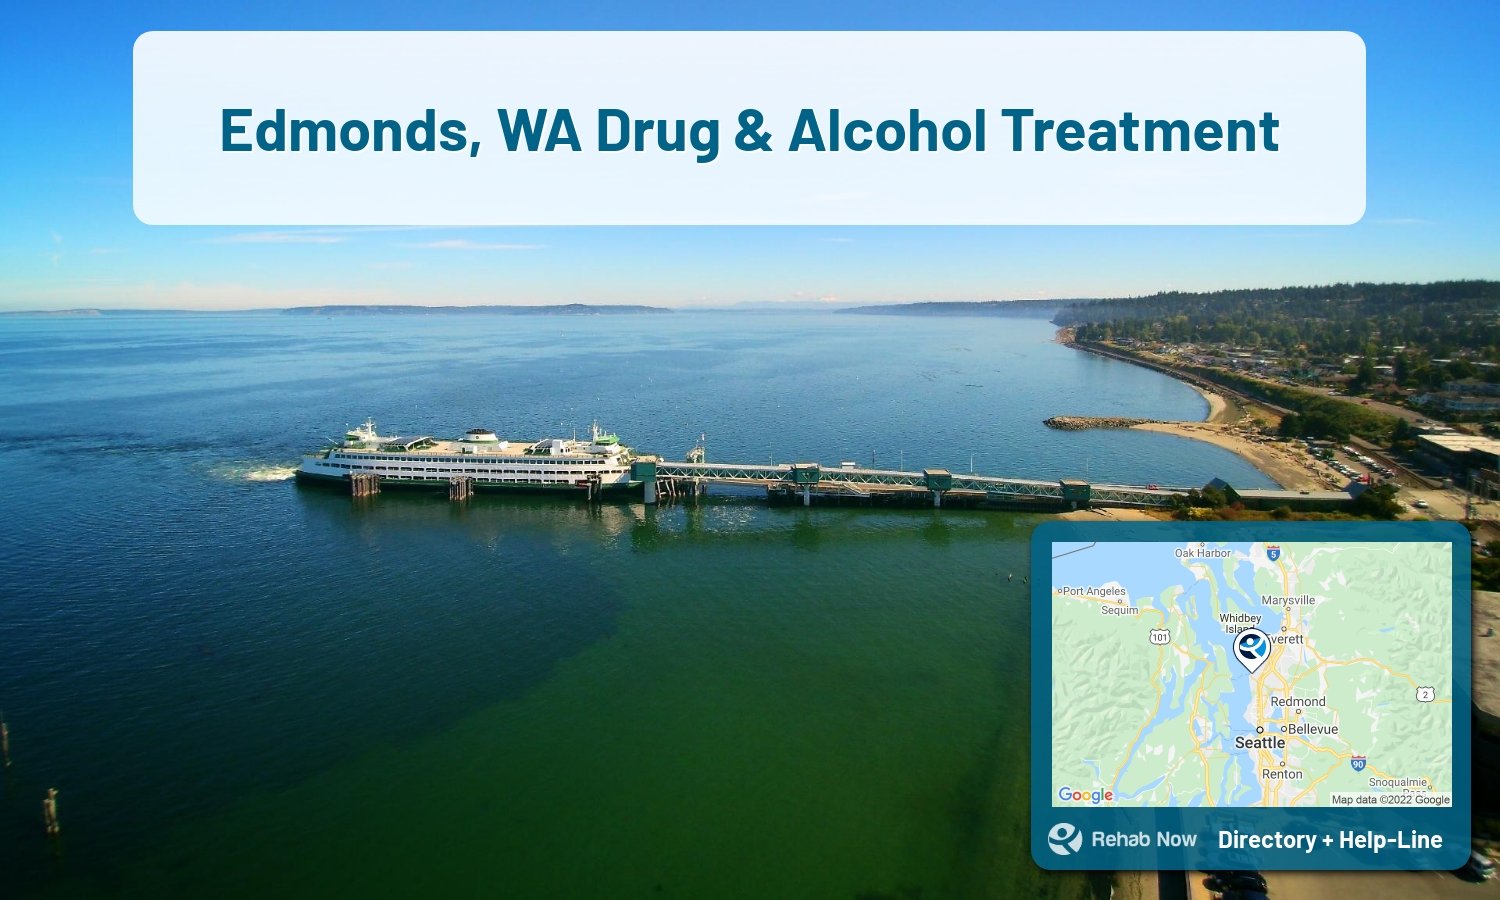 Edmonds, WA Treatment Centers. Find drug rehab in Edmonds, Washington, or detox and treatment programs. Get the right help now!